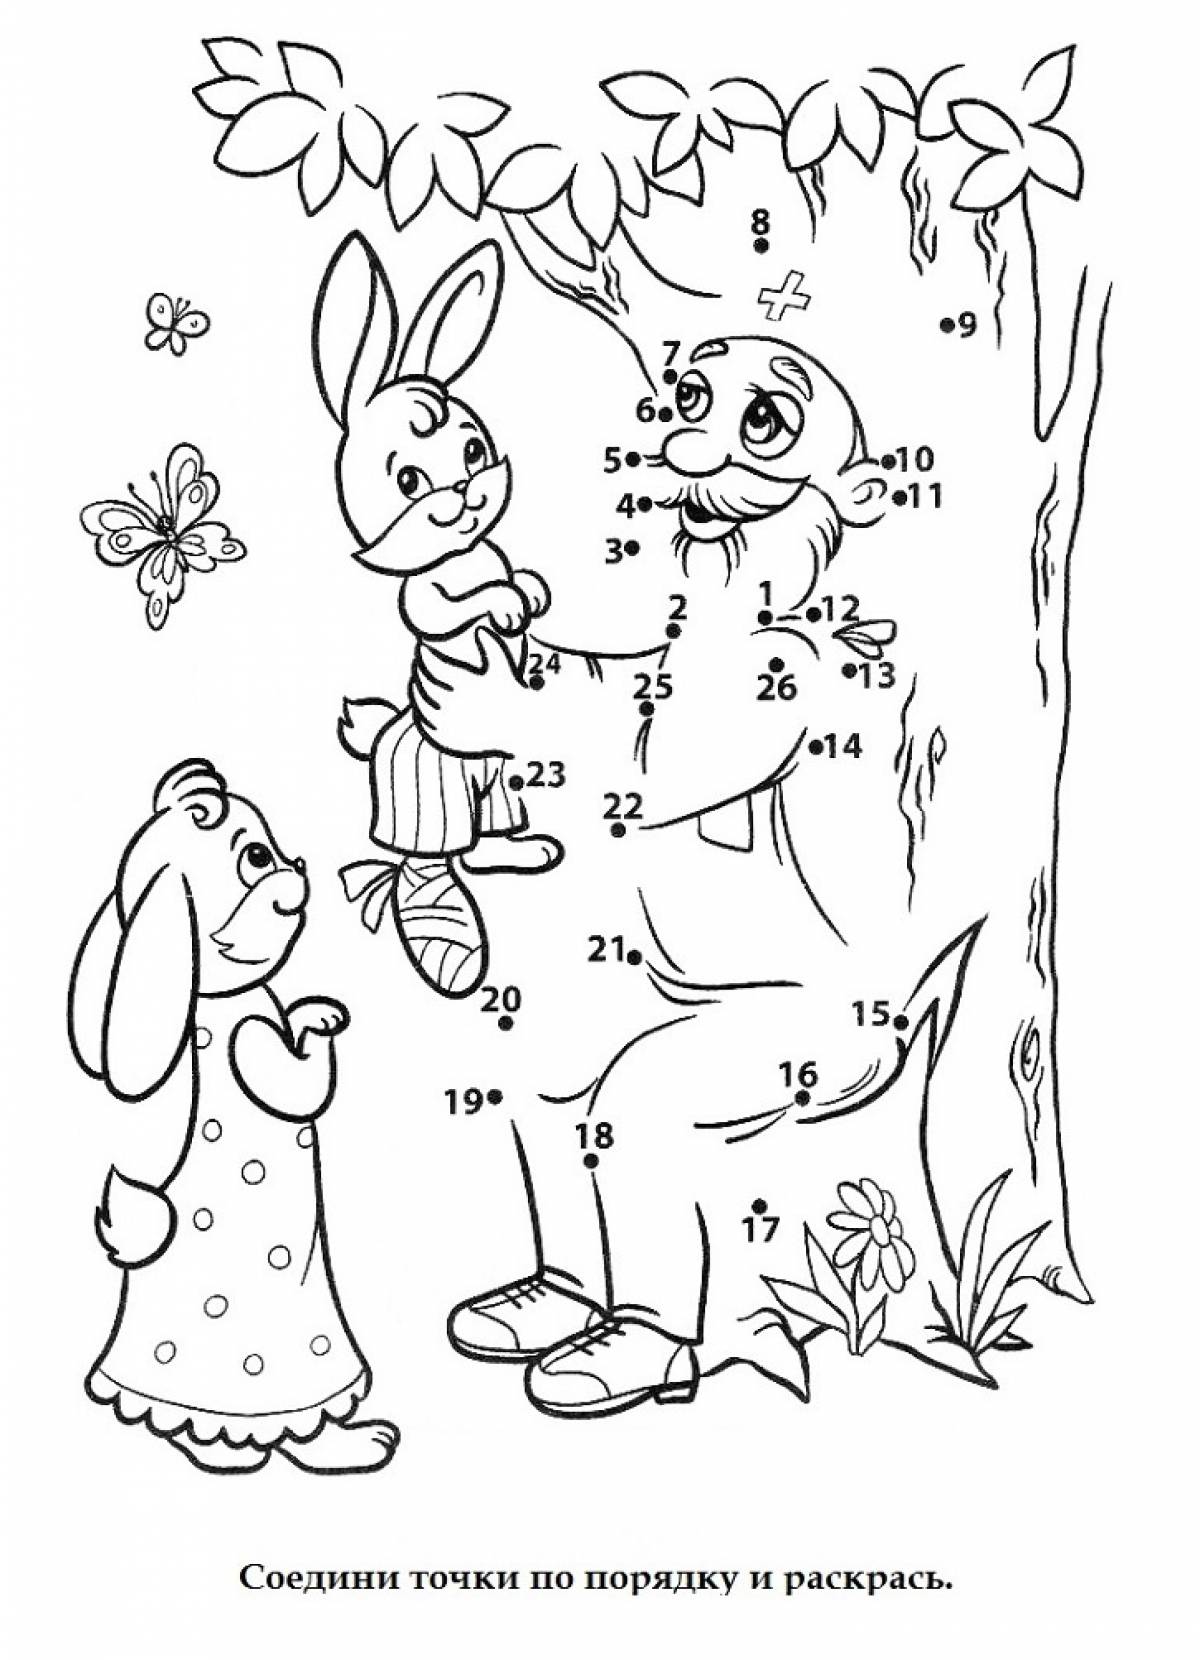 Grandfather and hares